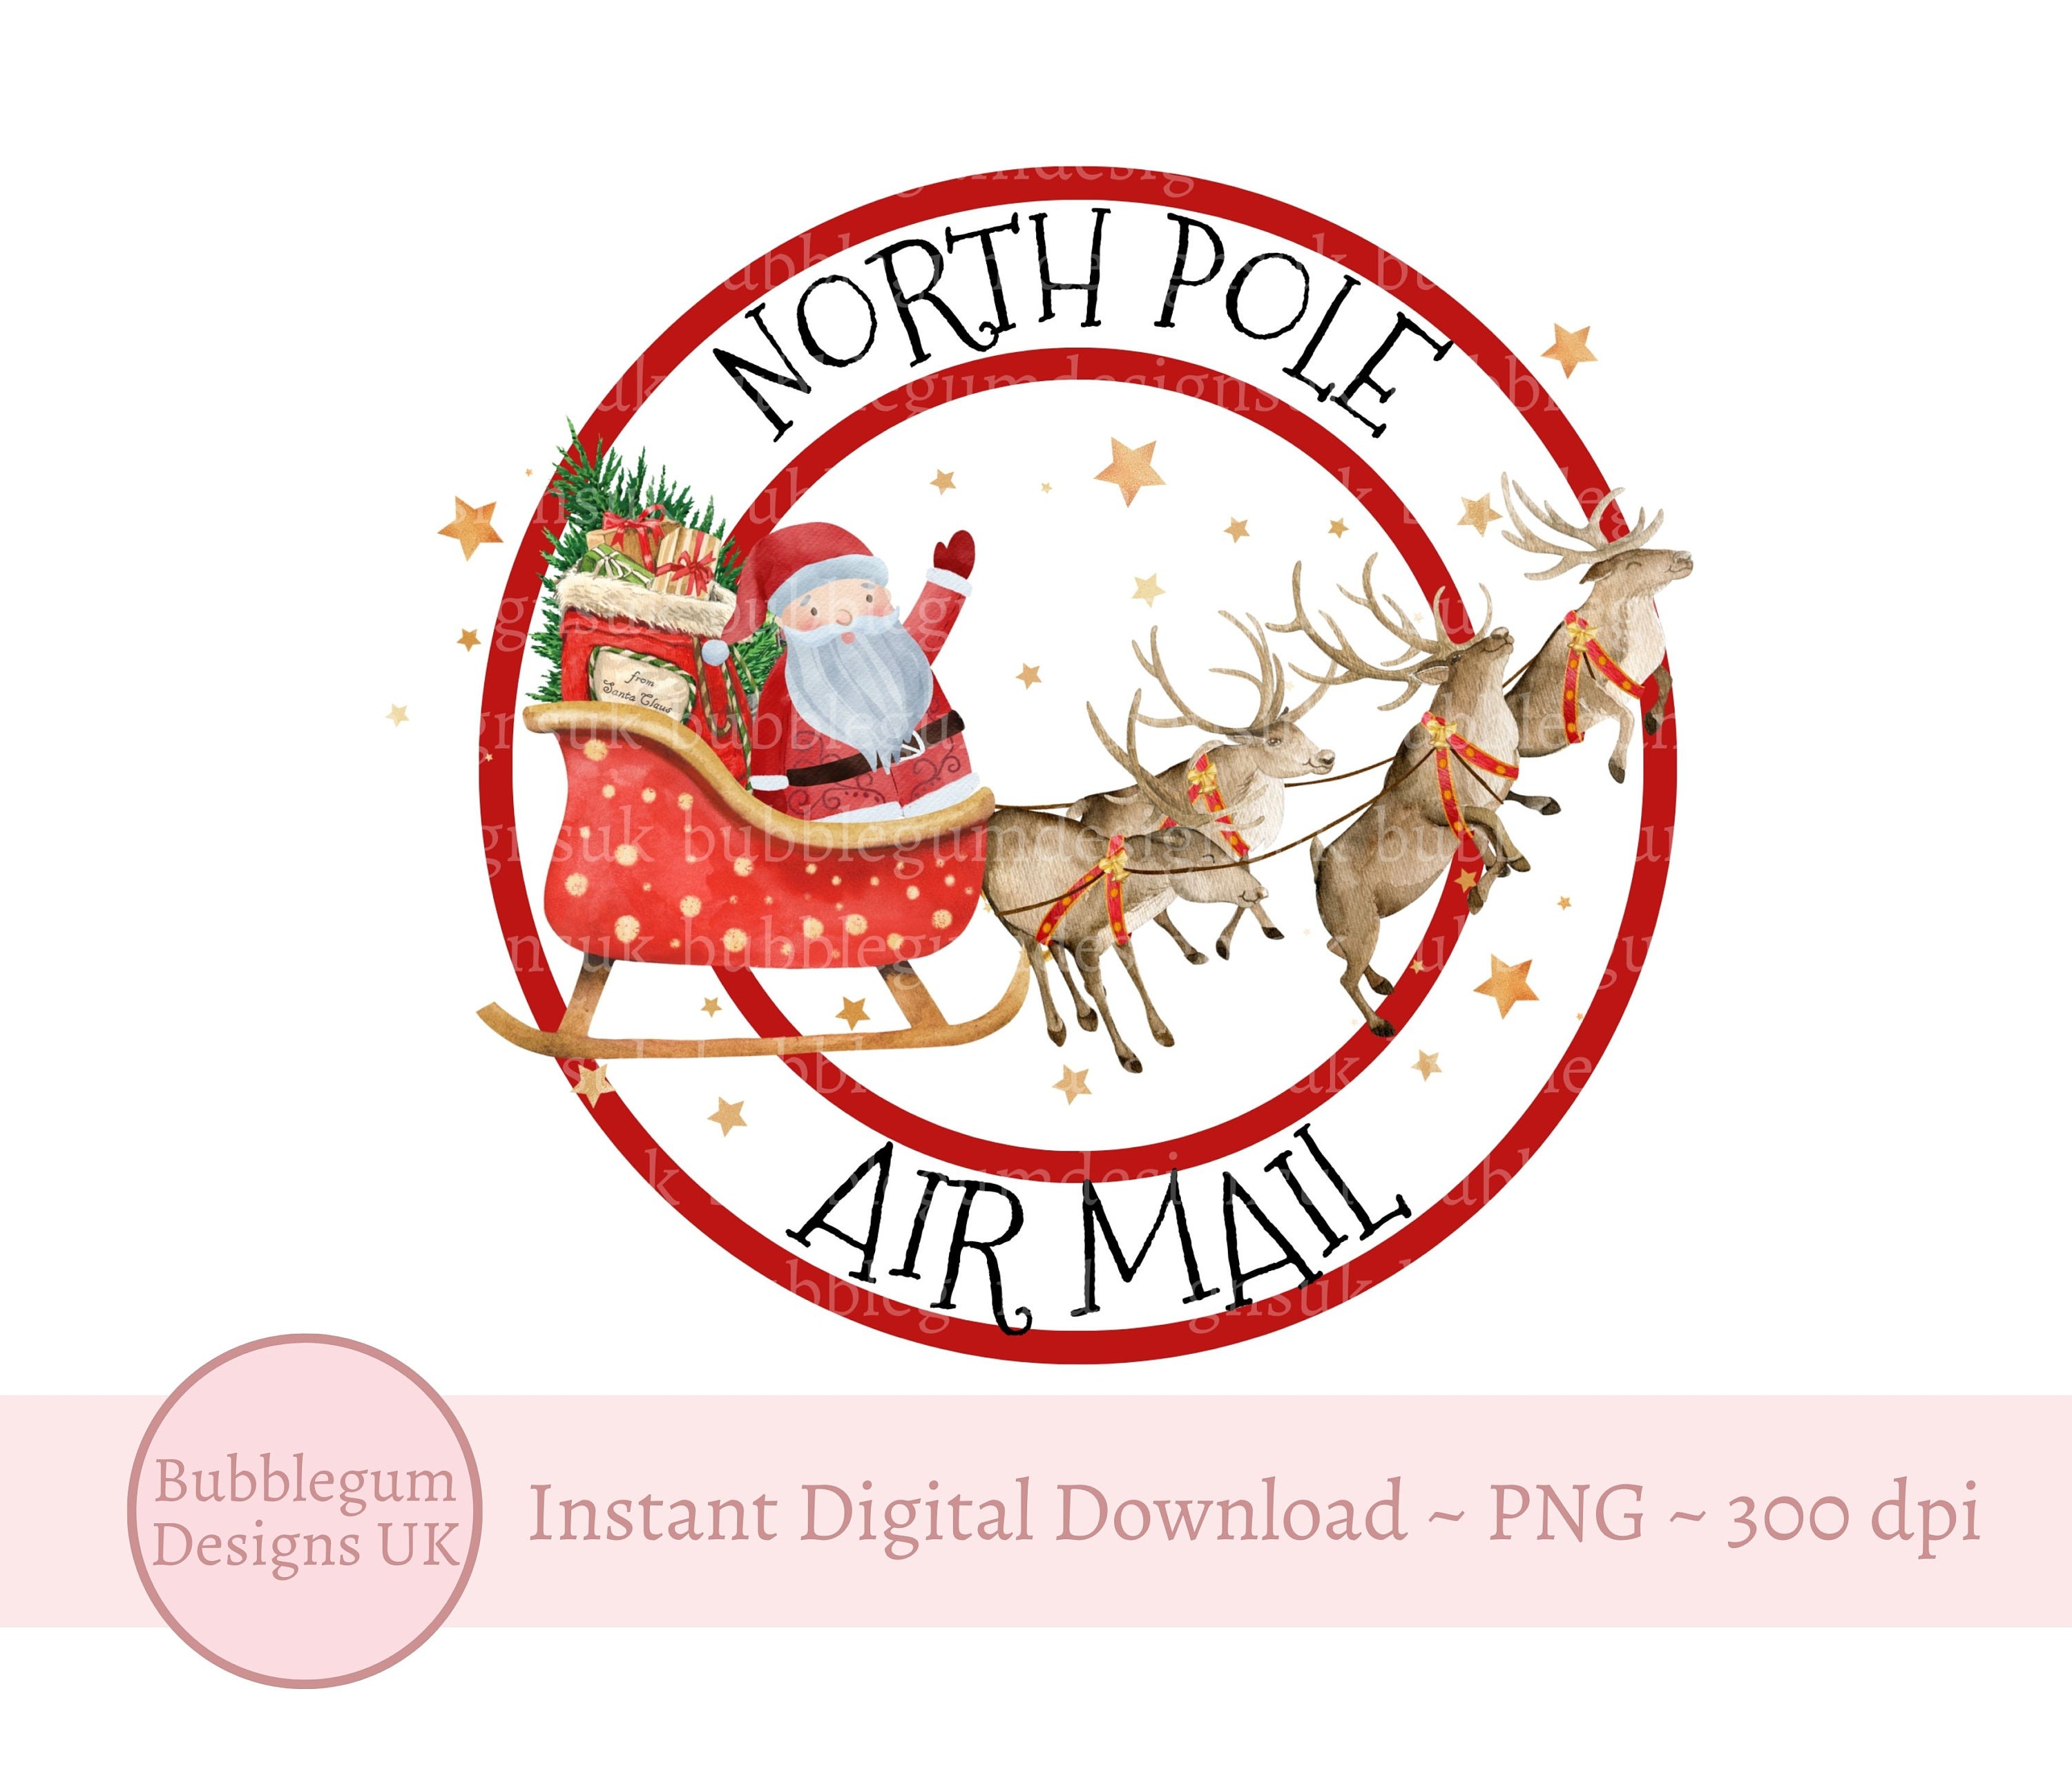 North Pole Mail Christmas Wrapping Paper Roll, Winter Holiday Xmas